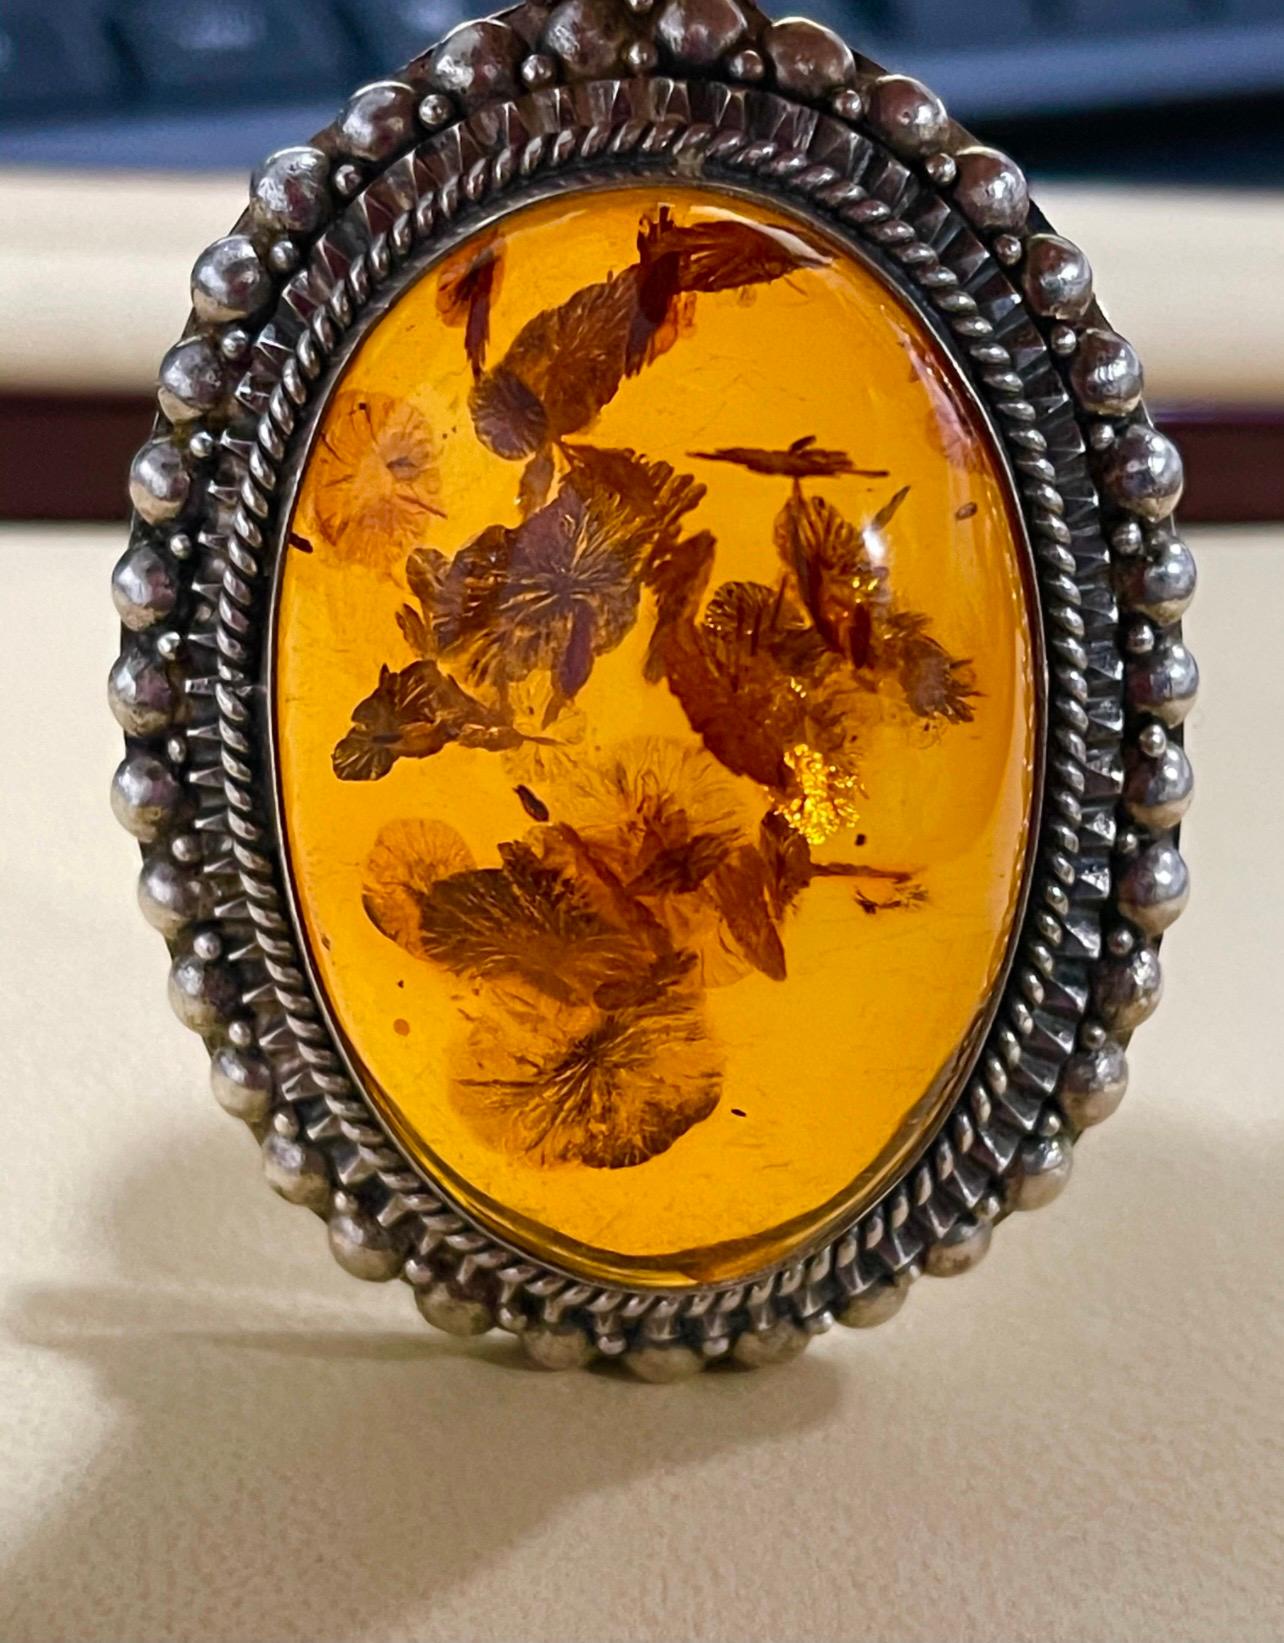 Approximately 200 Ct Natural Amber  Necklace / Pendant  surrounded by sterling silver 

Beautiful intense color Of amber
It has a bail for chain . No chain with the pendant. It has a large bail so one can put an omega chain or even a pearl